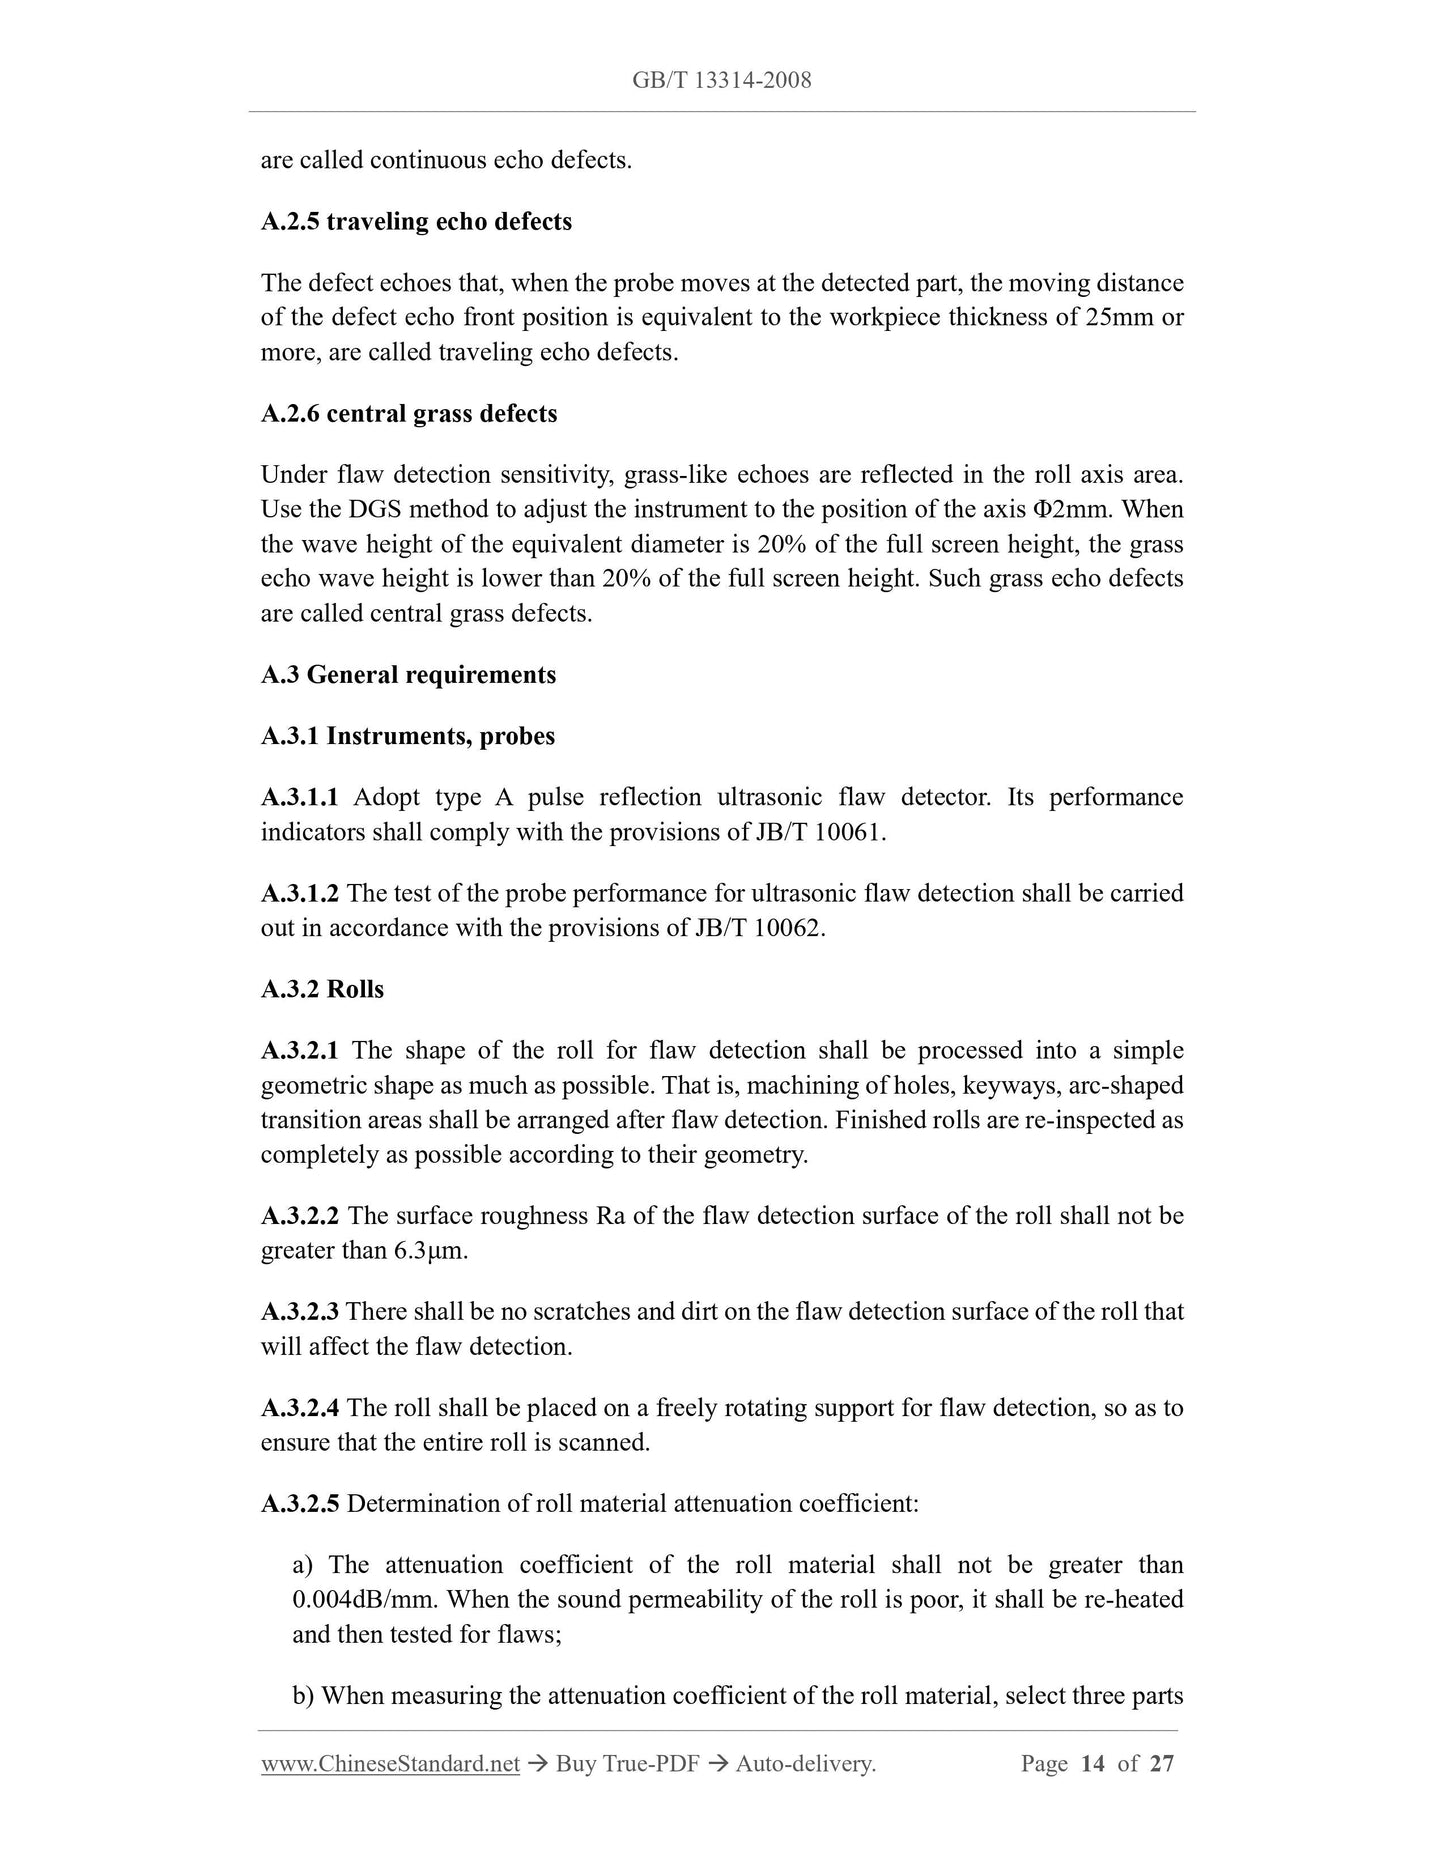 GB/T 13314-2008 Page 7